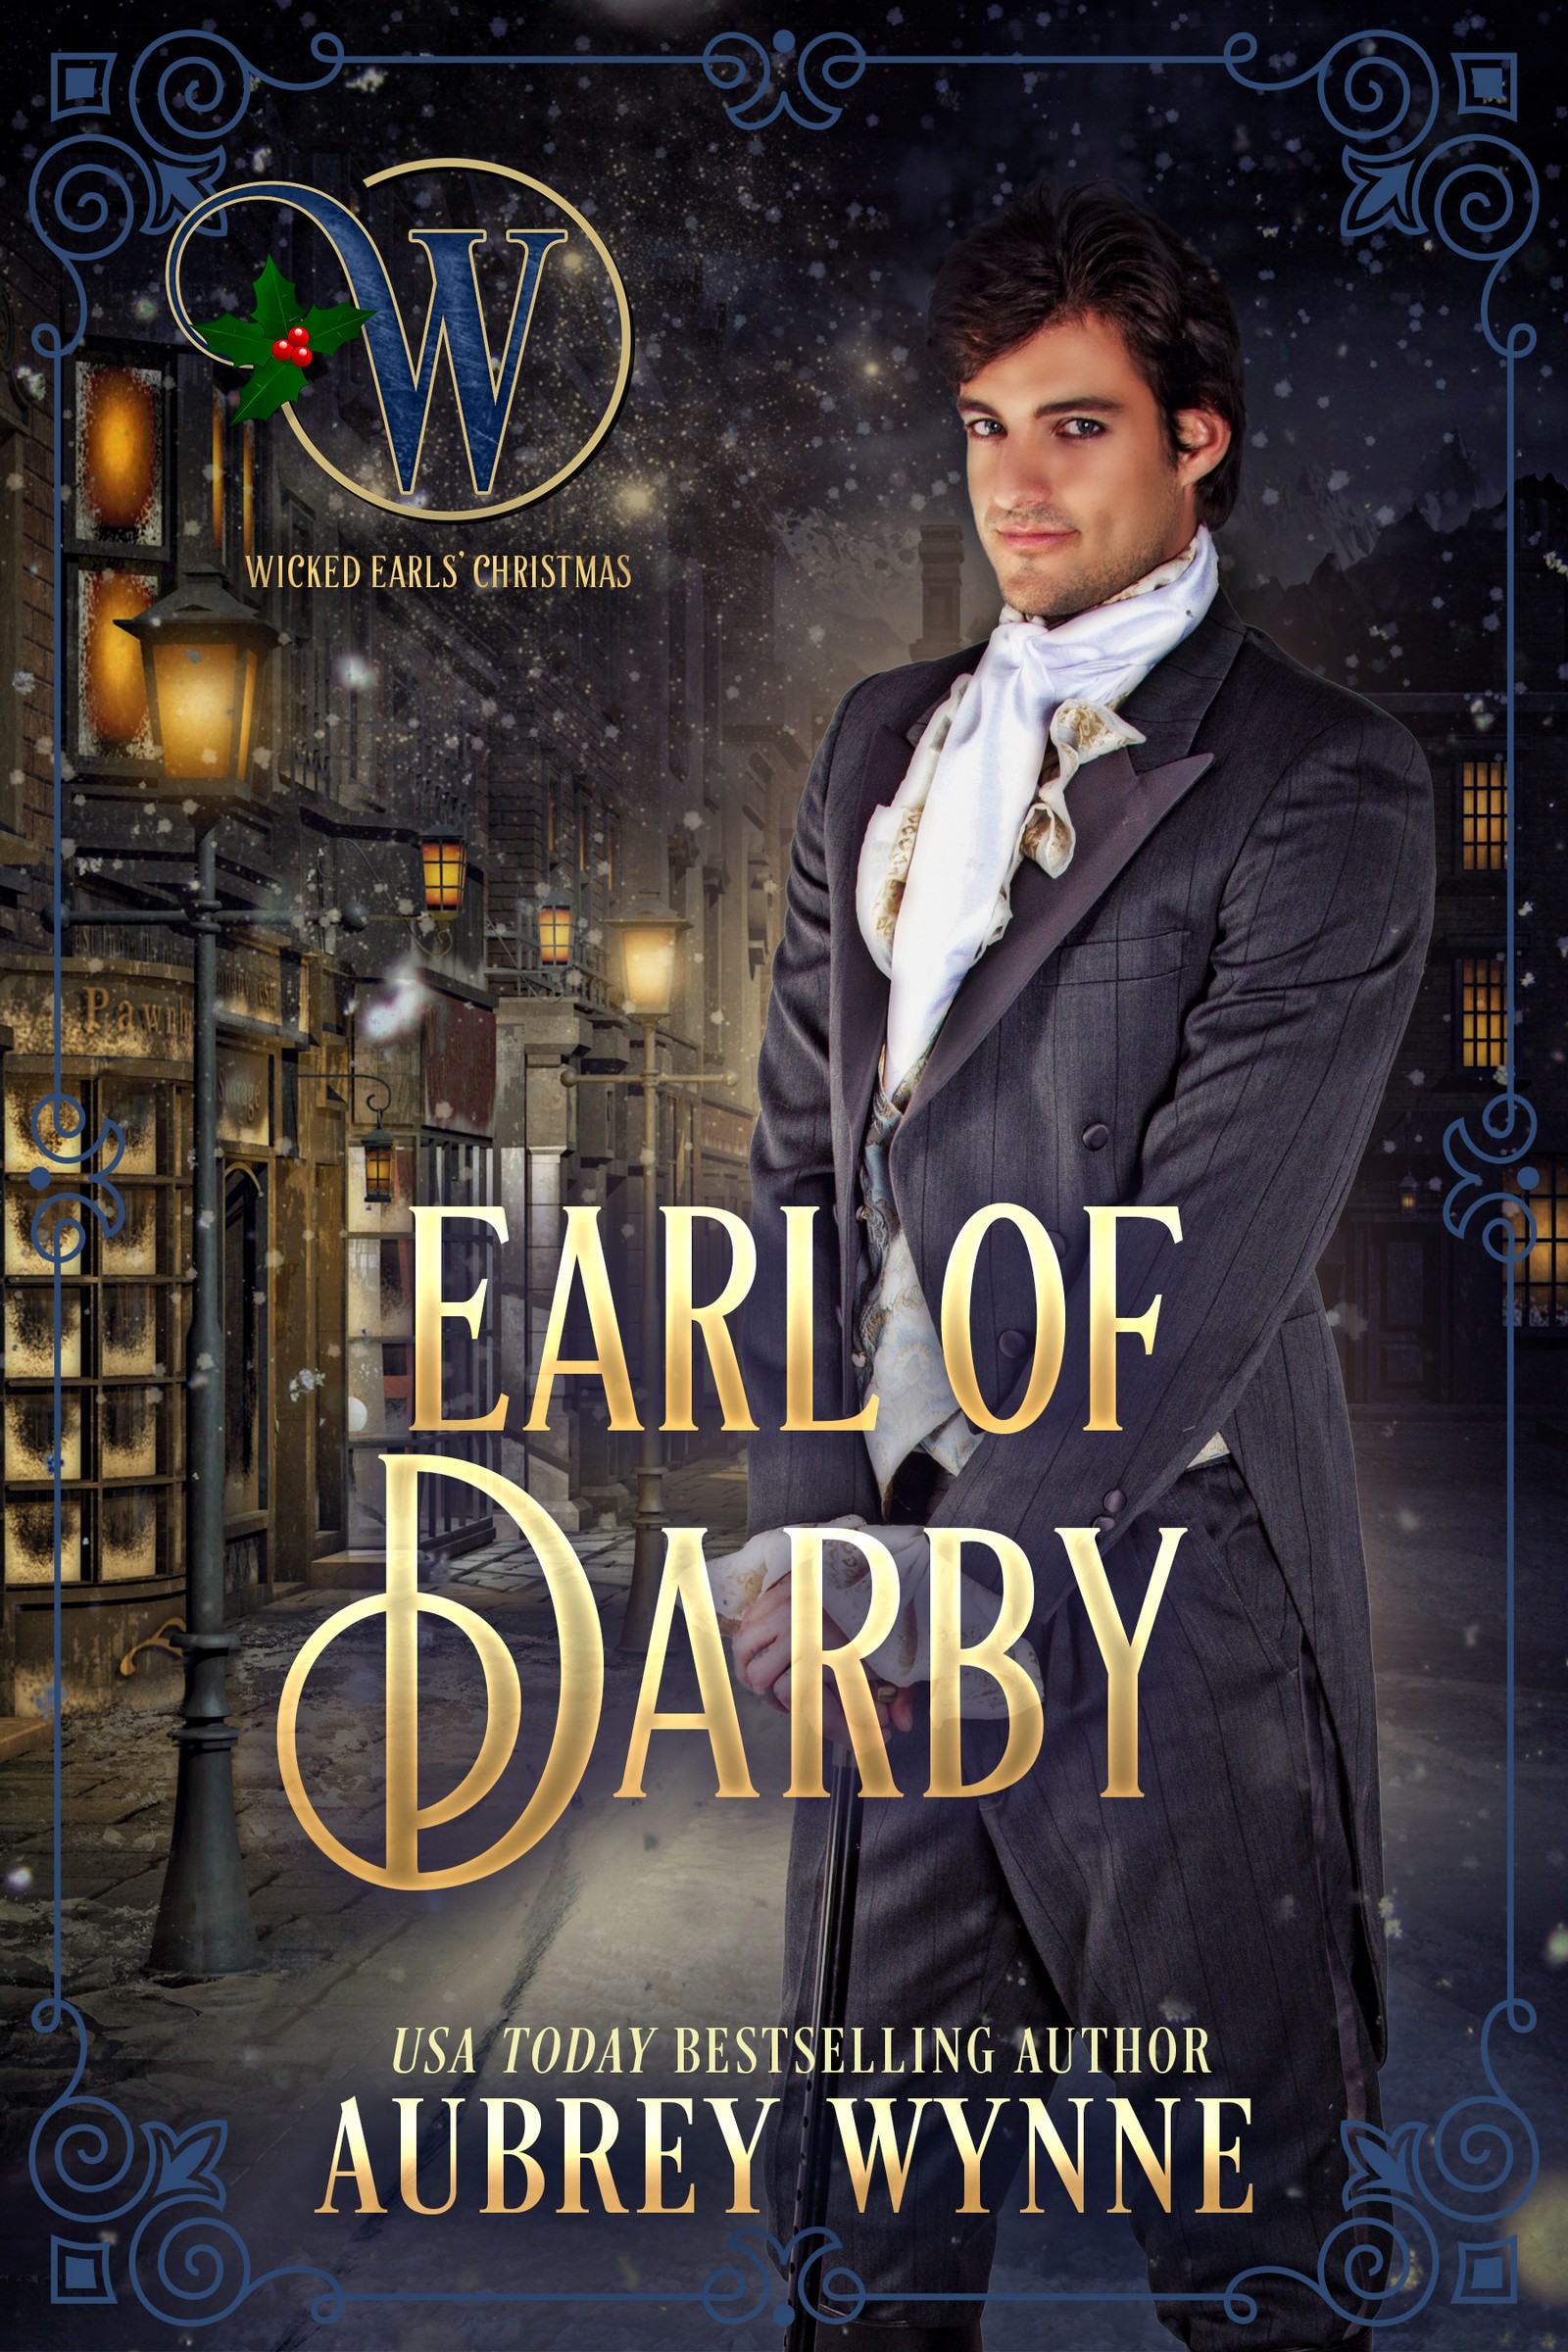 The Wicked Earls' Club no Apple Books